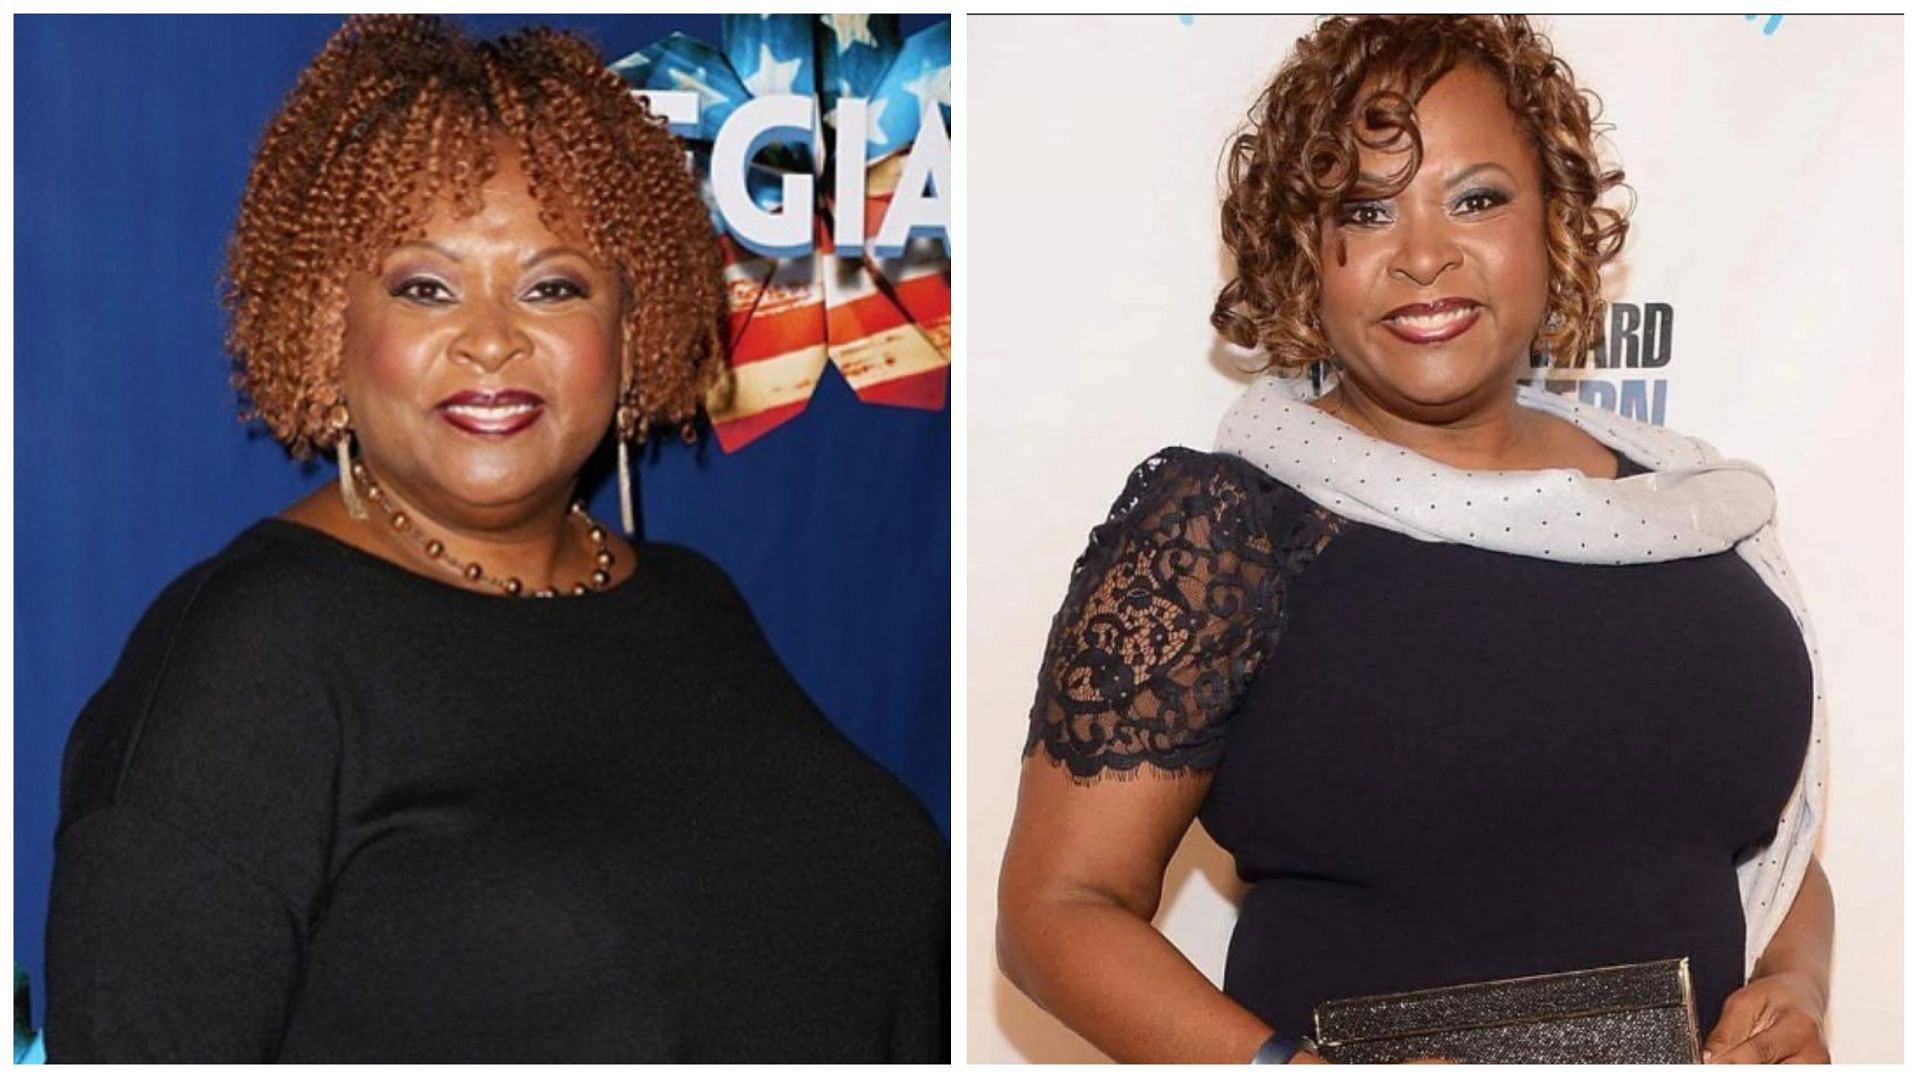 Weight Loss Everything You Need To Know About Robin Quivers' Weight